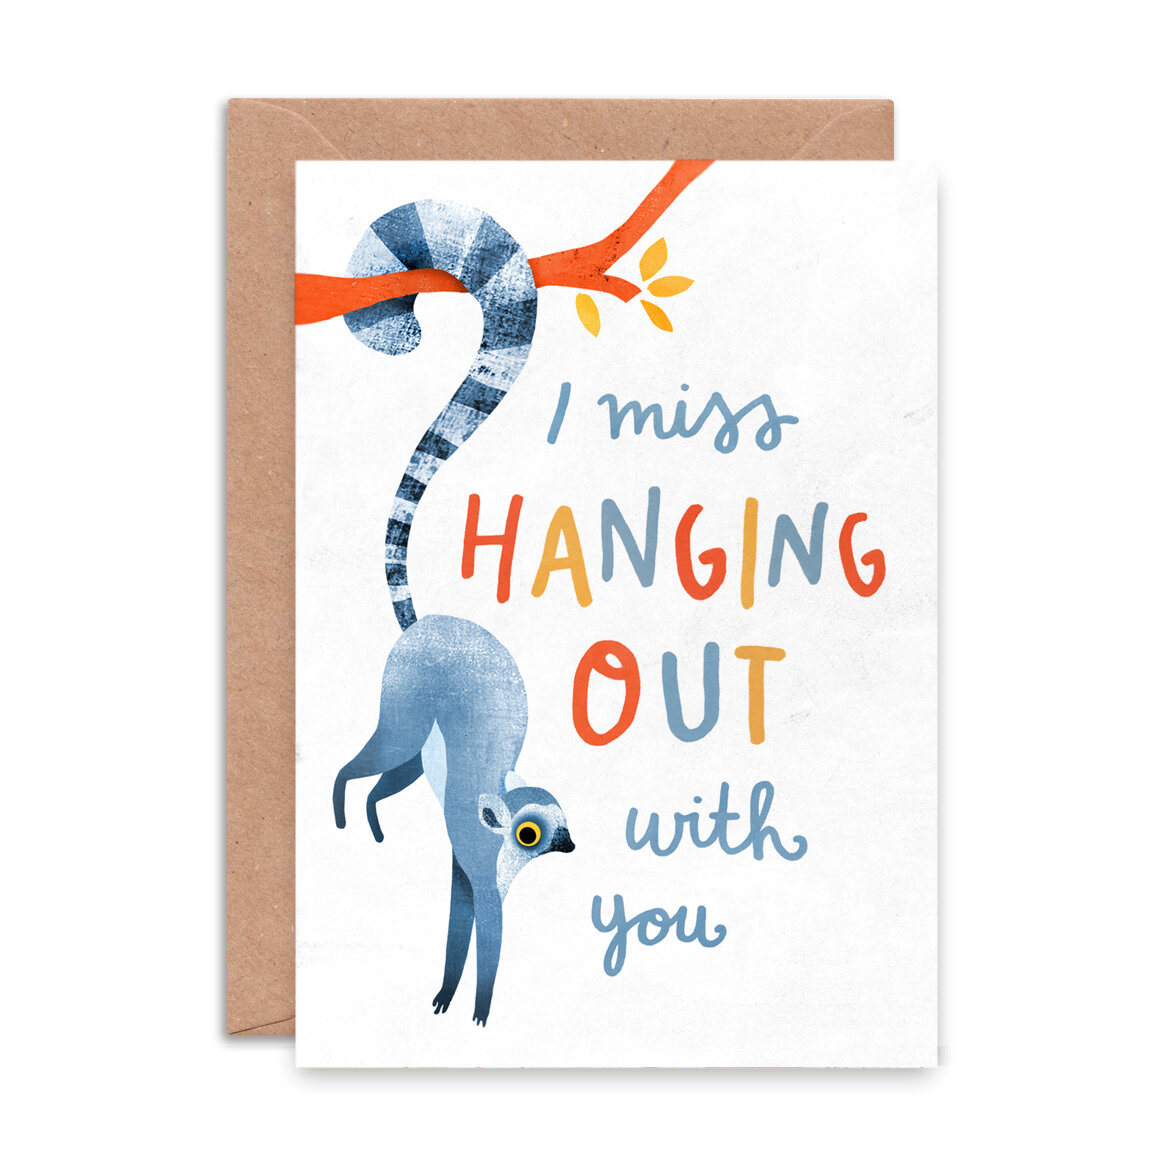 Emily Nash Illustration I Miss Hanging Out with You Greetings Card